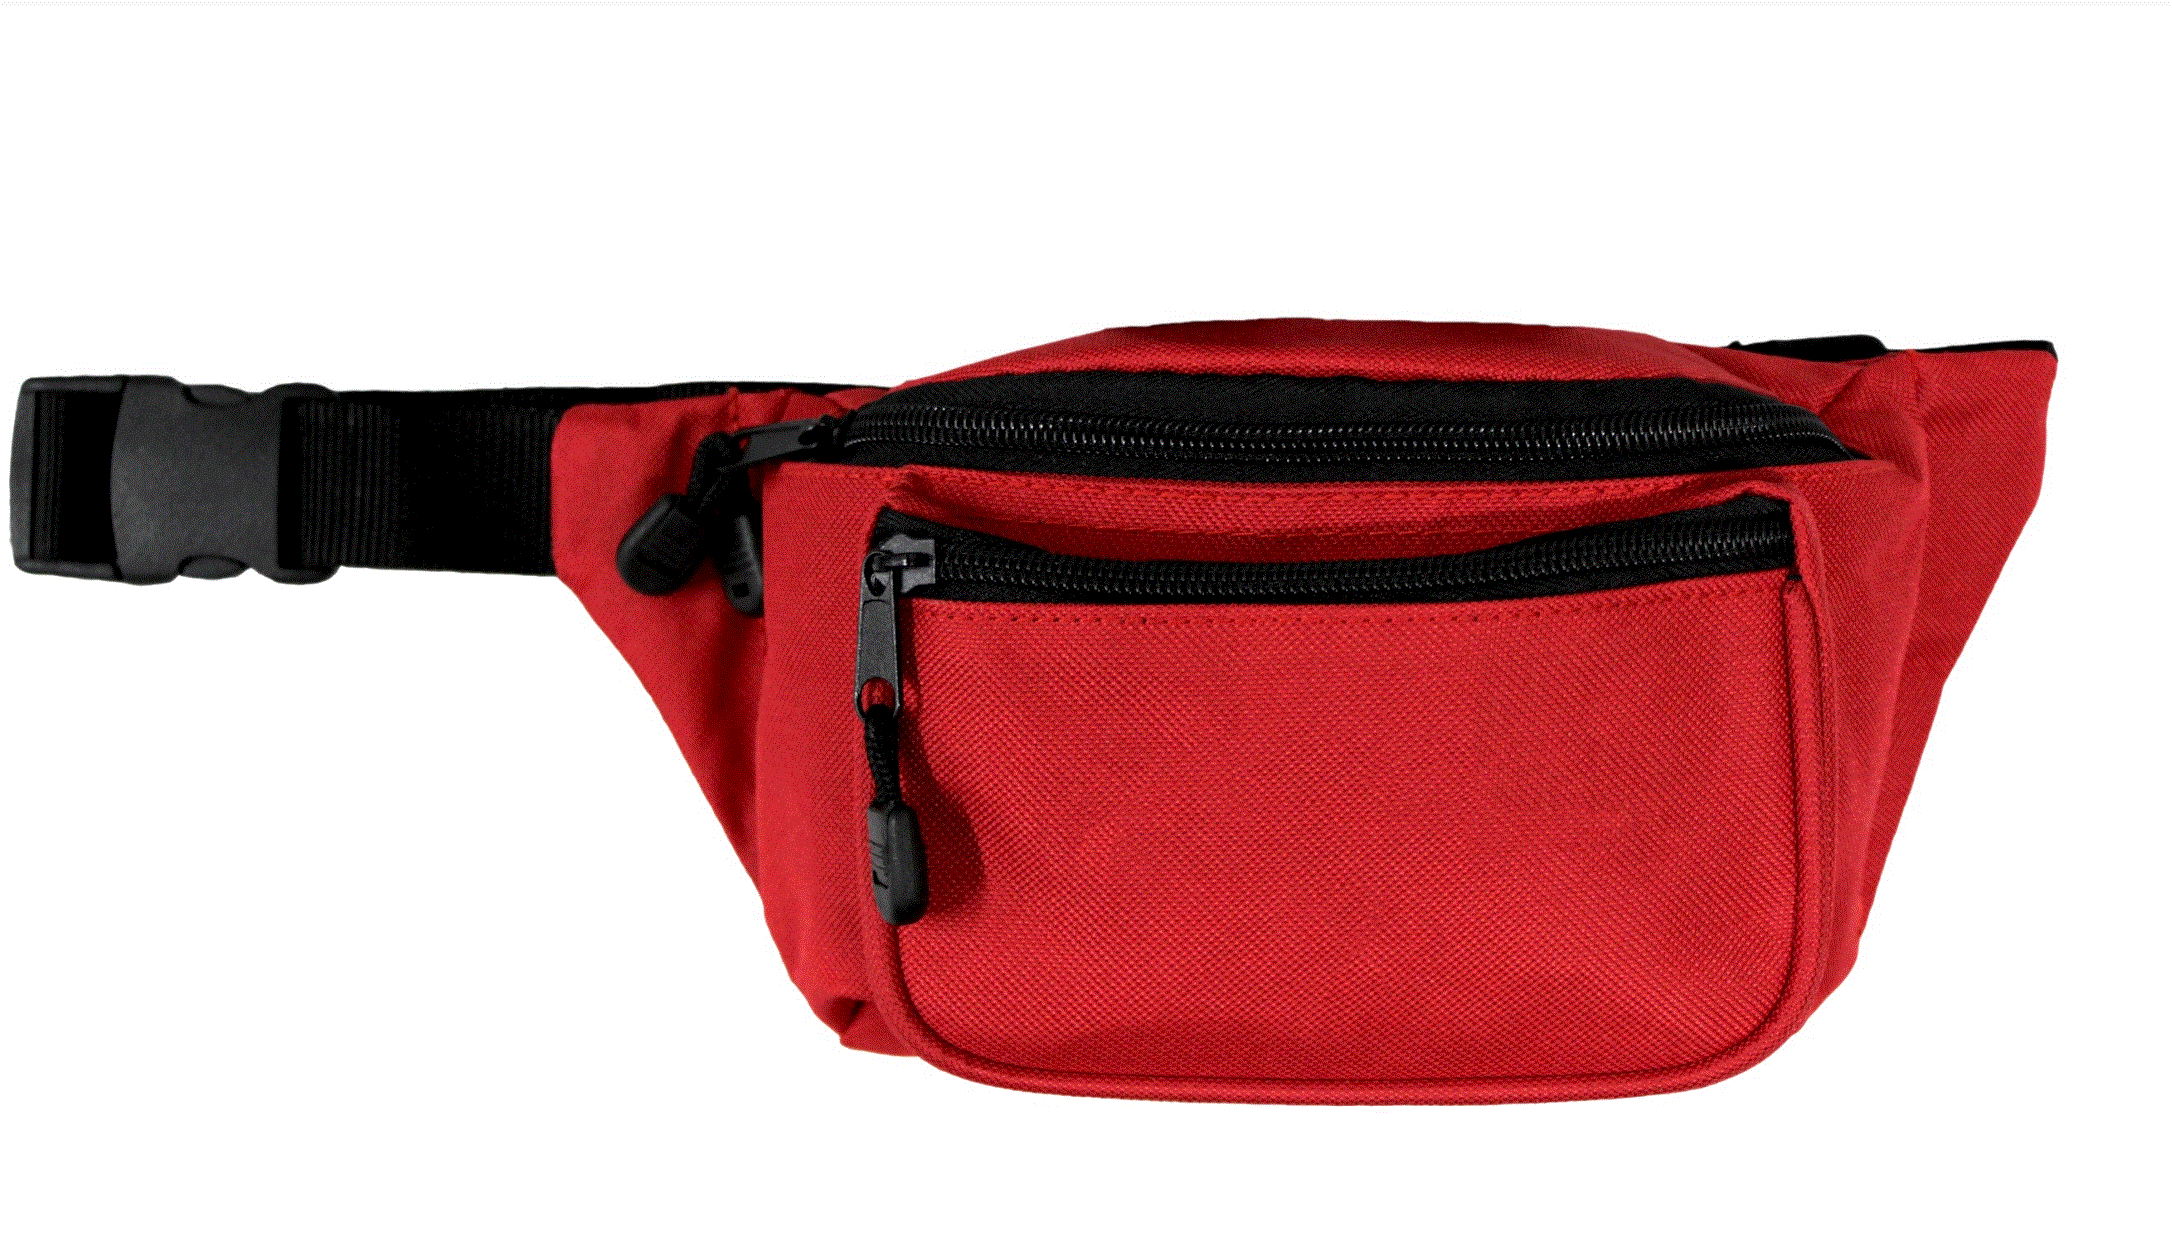 Kemp USA Fanny Pack, with No Logo, Red $7.31/Each Kemp USA 10-103-RED-NL